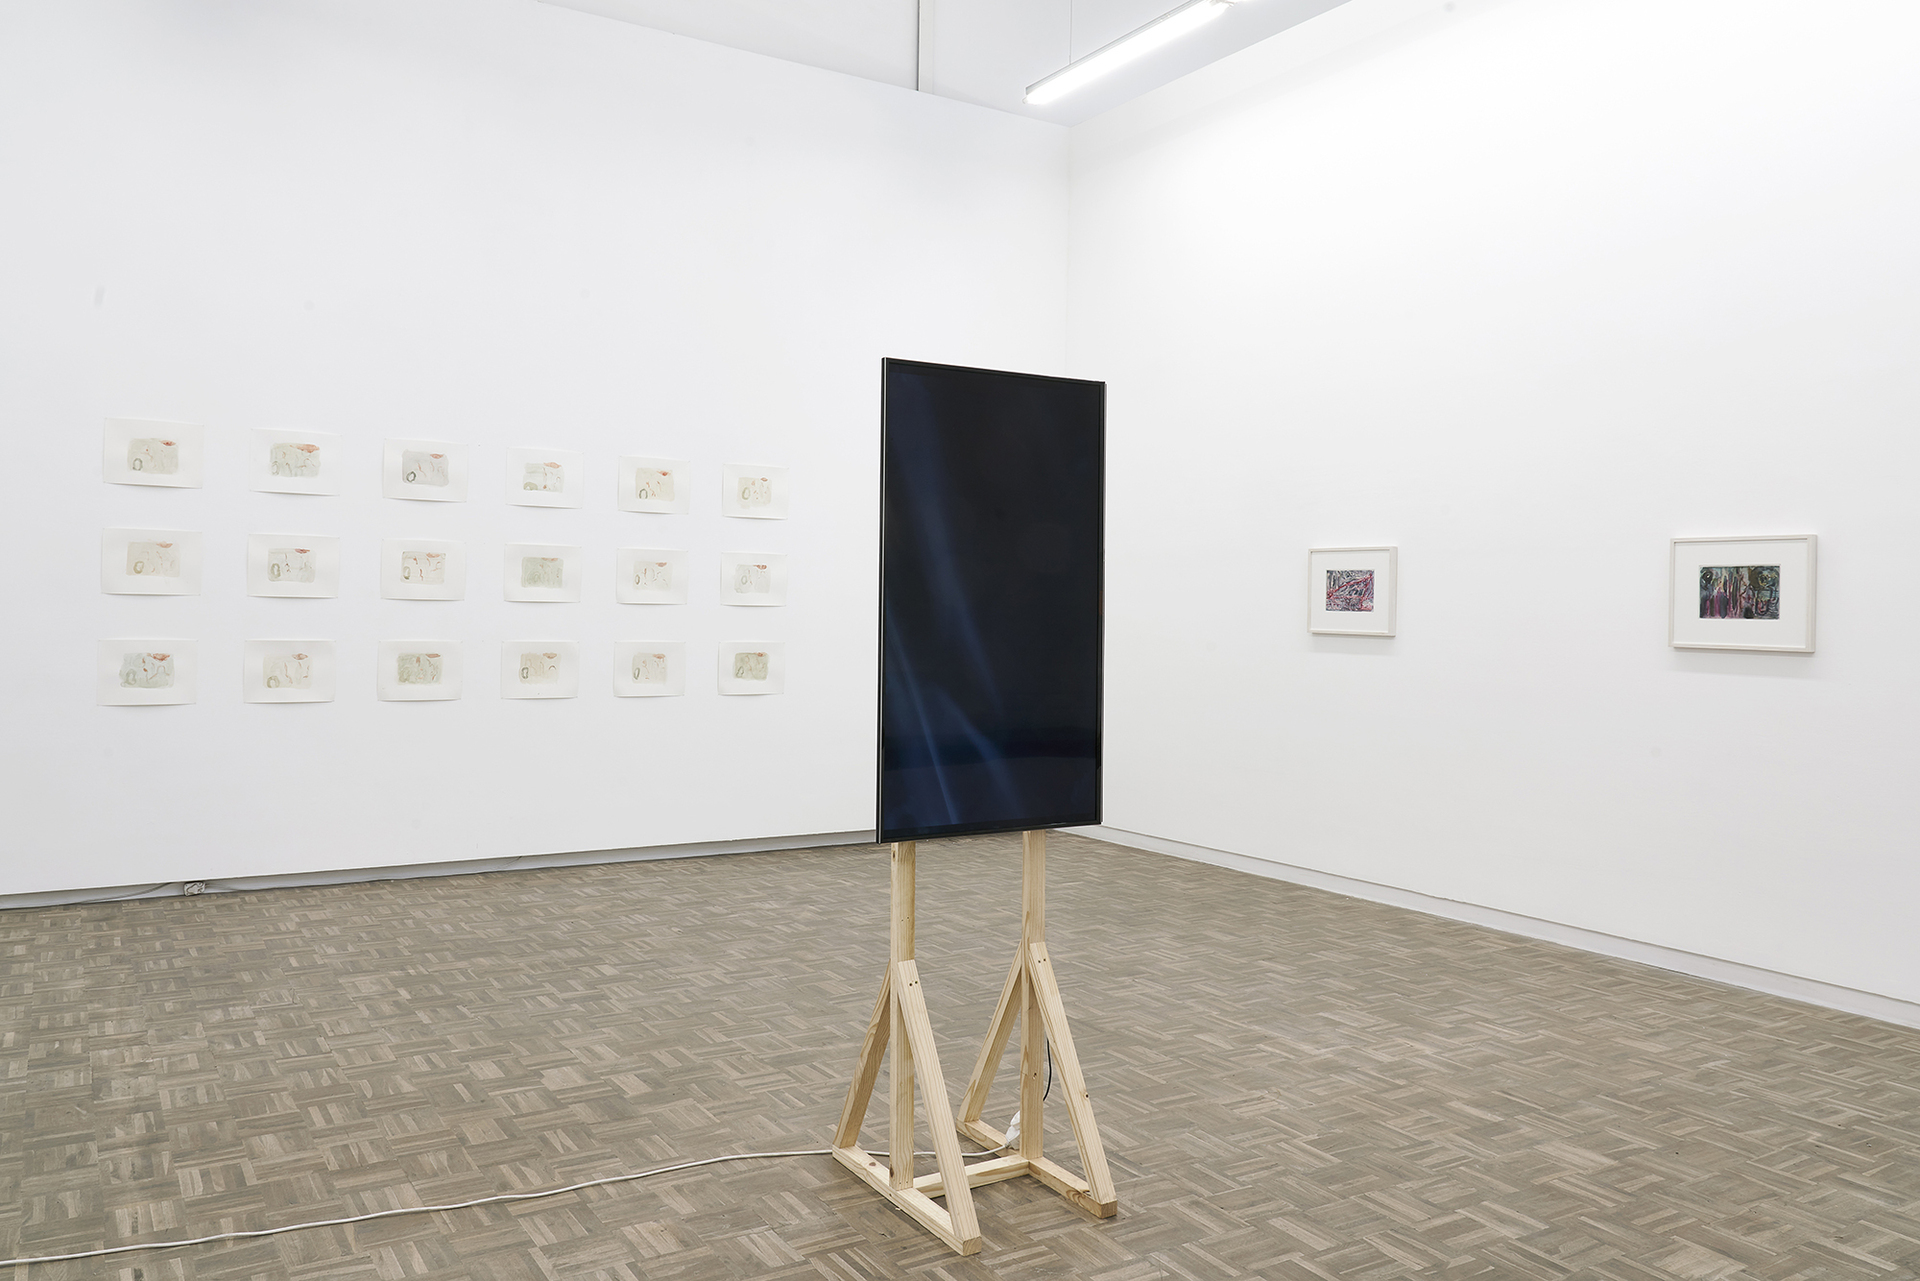 Achraf Touloub, 'Vies paralleles', 2022 | Installation view at blank projects, Cape Town (10)